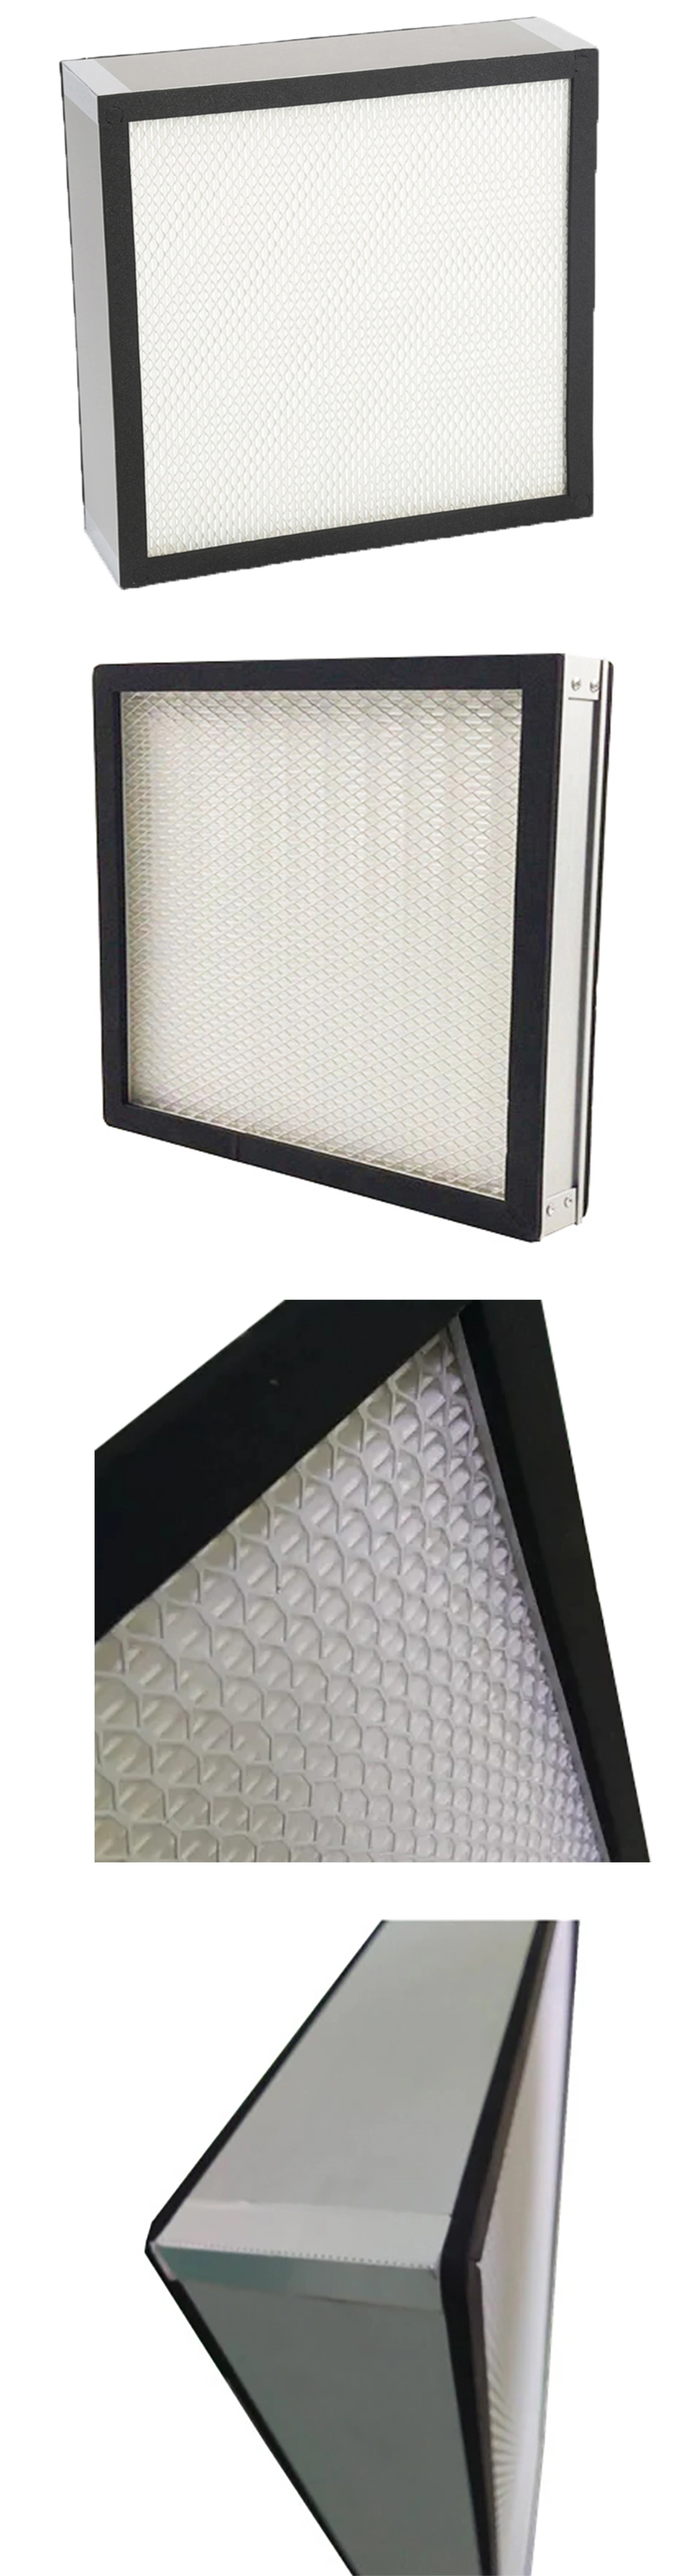 H13 High Efficiency Mini Pleat HEPA Air Filter Without Separator for Pharmaceutical Room